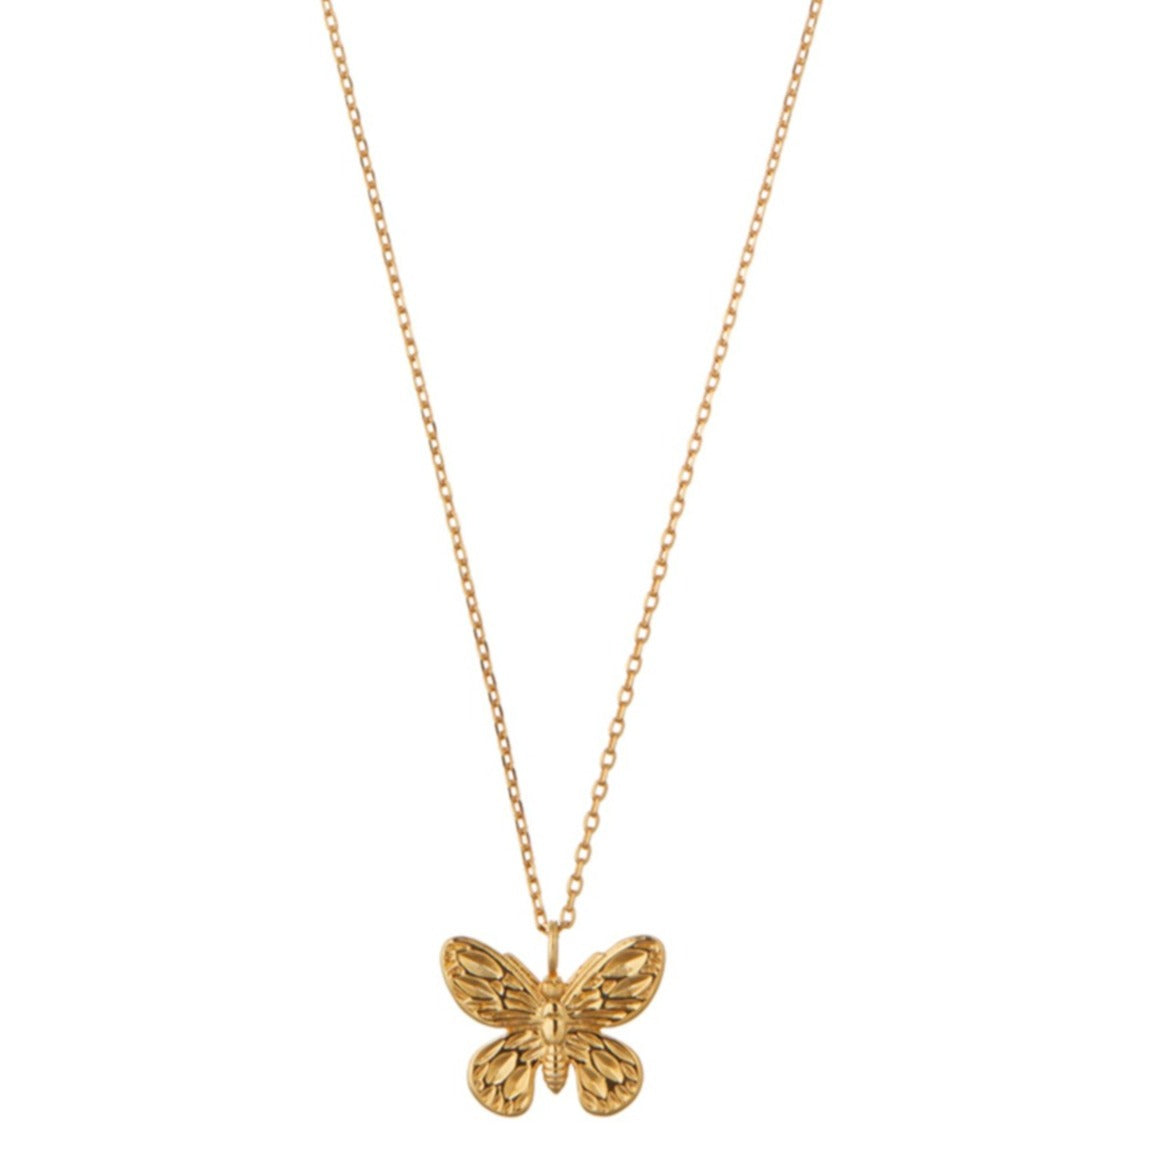 Buy Tiny Gold Butterfly Necklace Gift for Her Bridesmaid Gift Flower Girl  Dainty Minimal Necklace Gold Wings Cute Butterfly Gift Idea Online in India  - Etsy